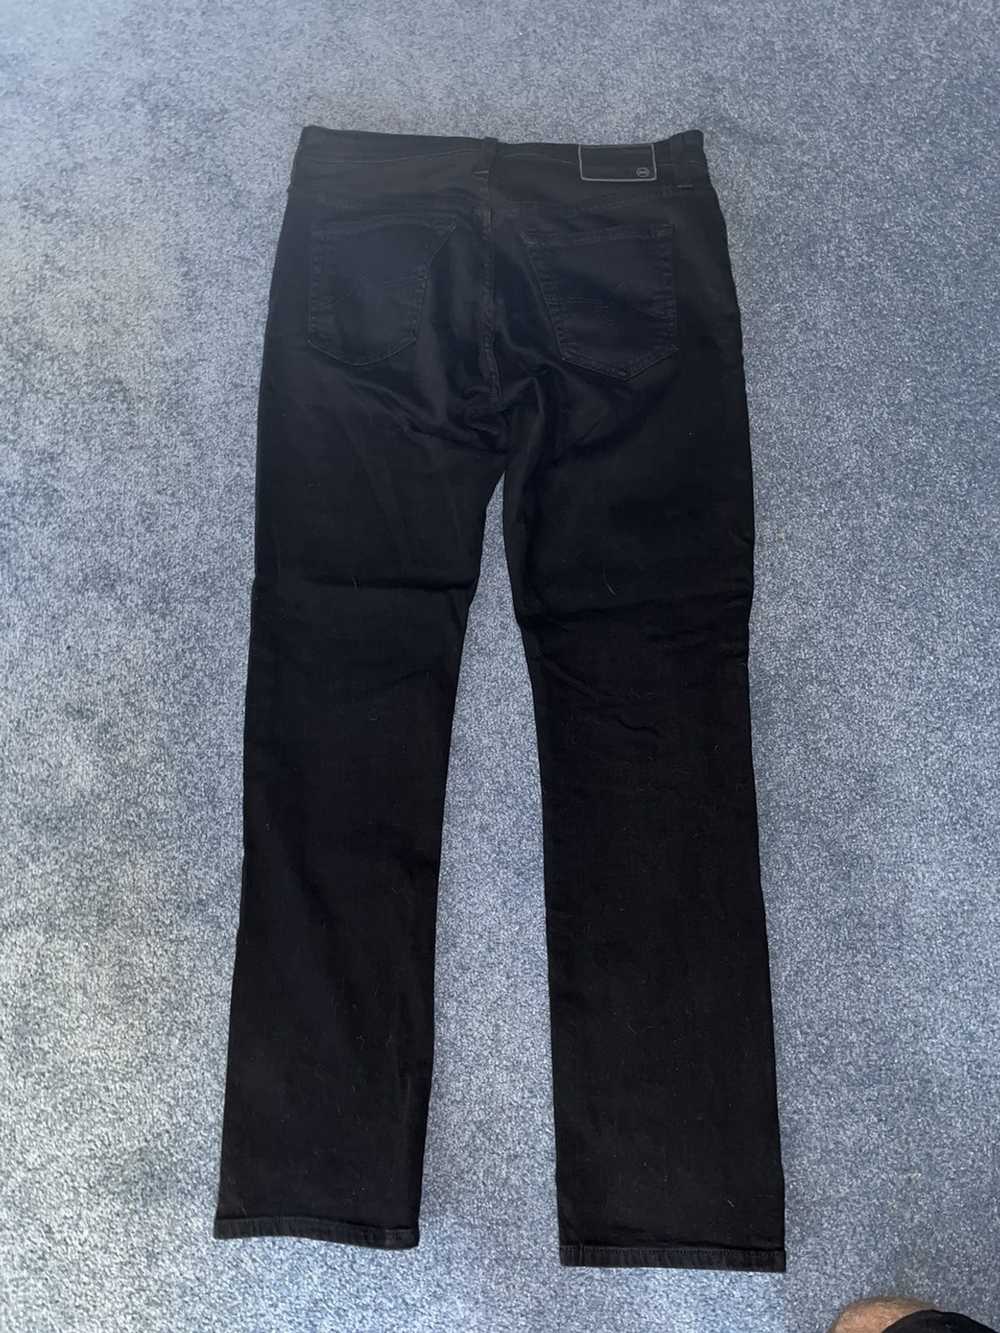 AG Adriano Goldschmied AG Black Jeans - image 5